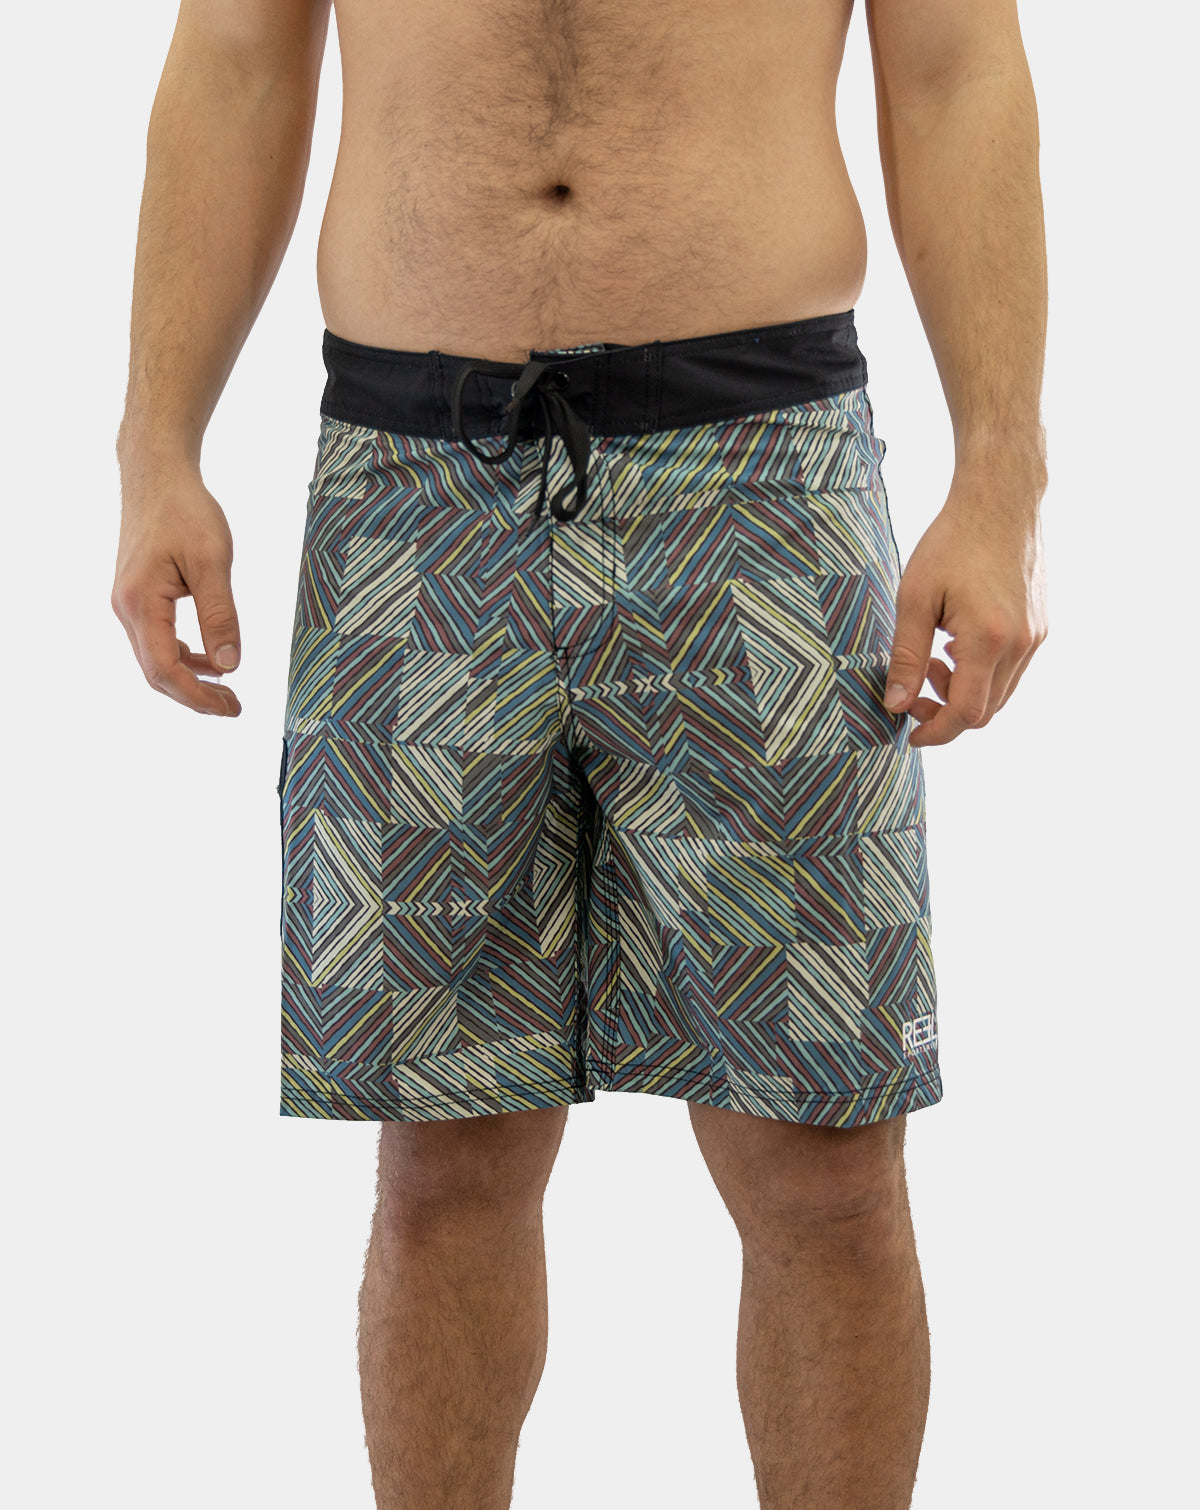 Multi-colored and black Lunkerbunker boardshorts for men with a stylish design, featuring UPF30+ 4-way stretch fabric, quick-dry technology, anti-microbial properties, fixed waist, double bonded butt seam for added strength, side zipper pocket, laser cut holes, 21&quot; outseam and side patch pockets for ultimate fishing performance.